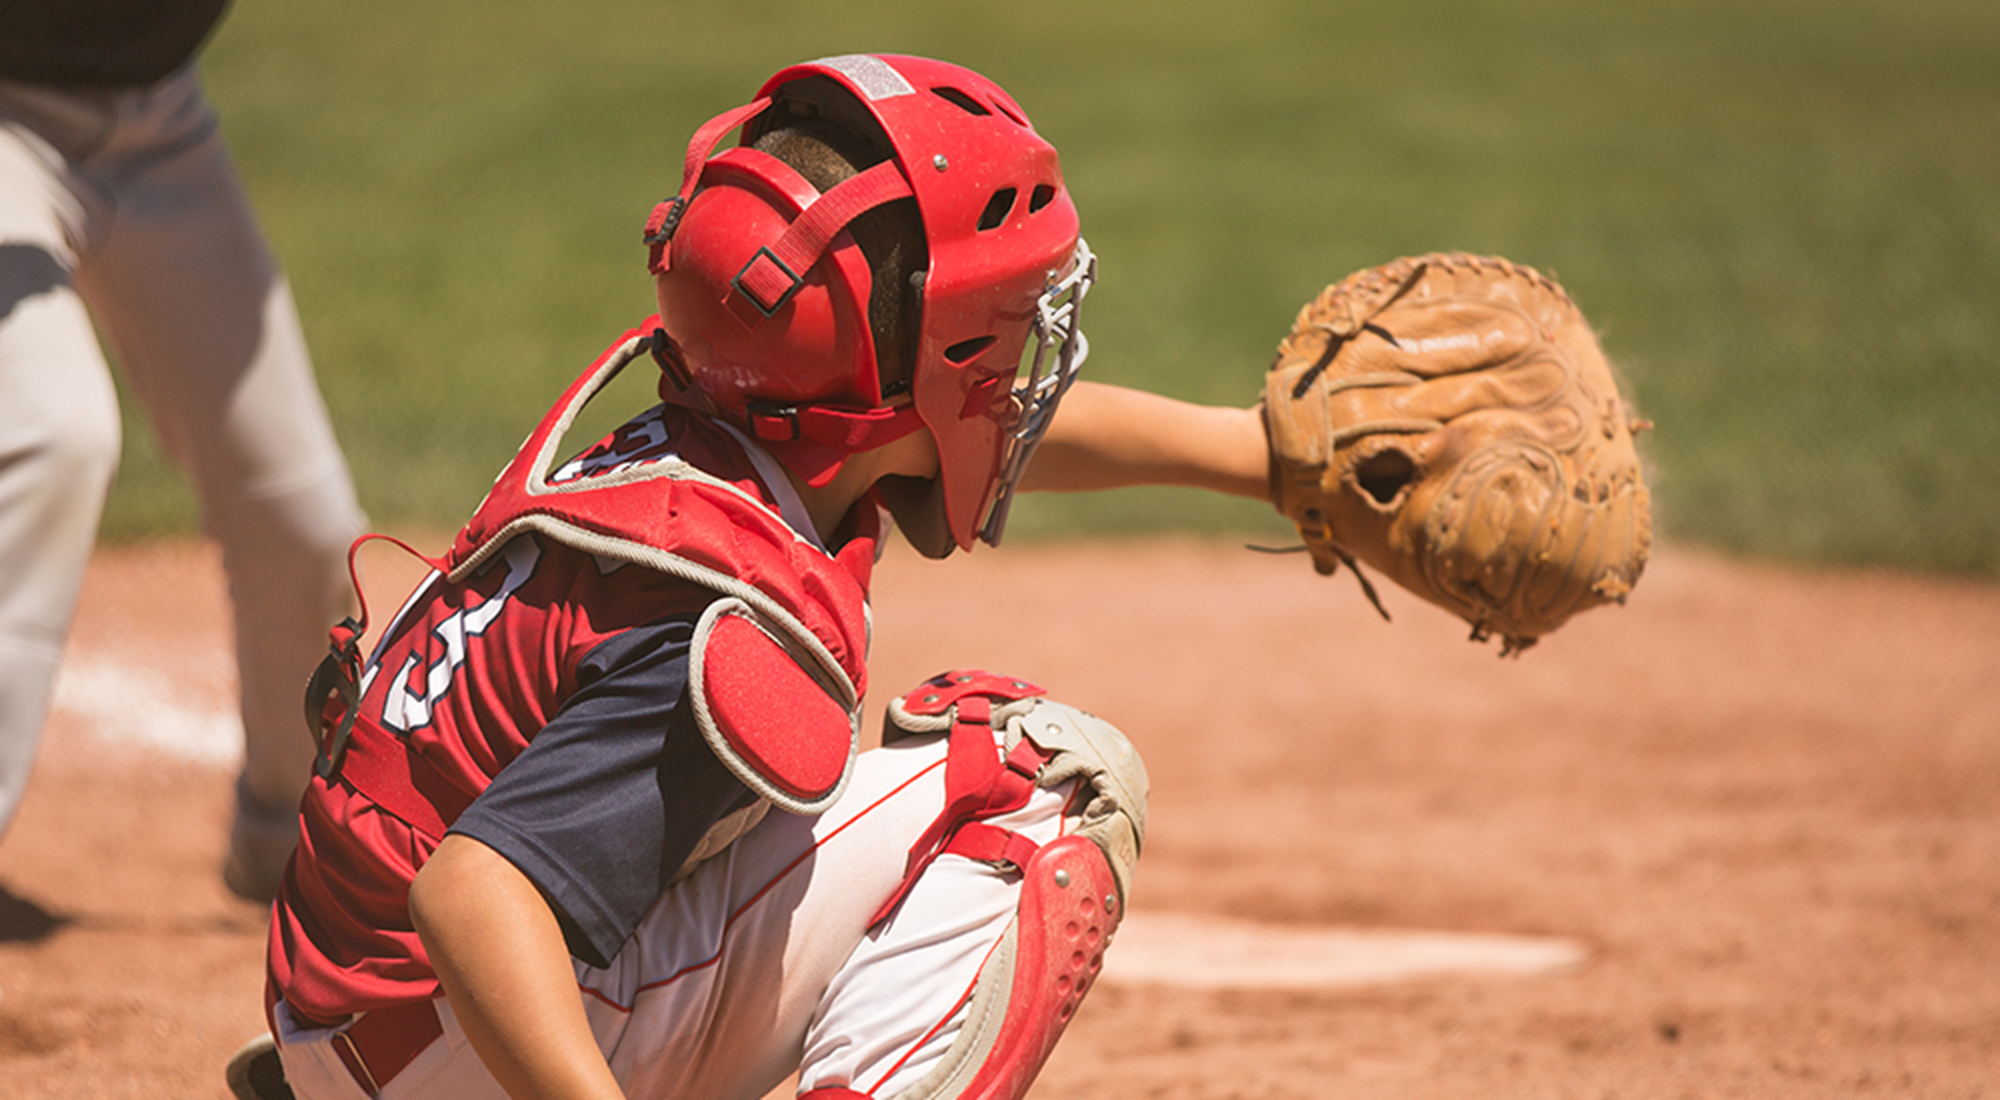 Youth Baseball Catcher During Game